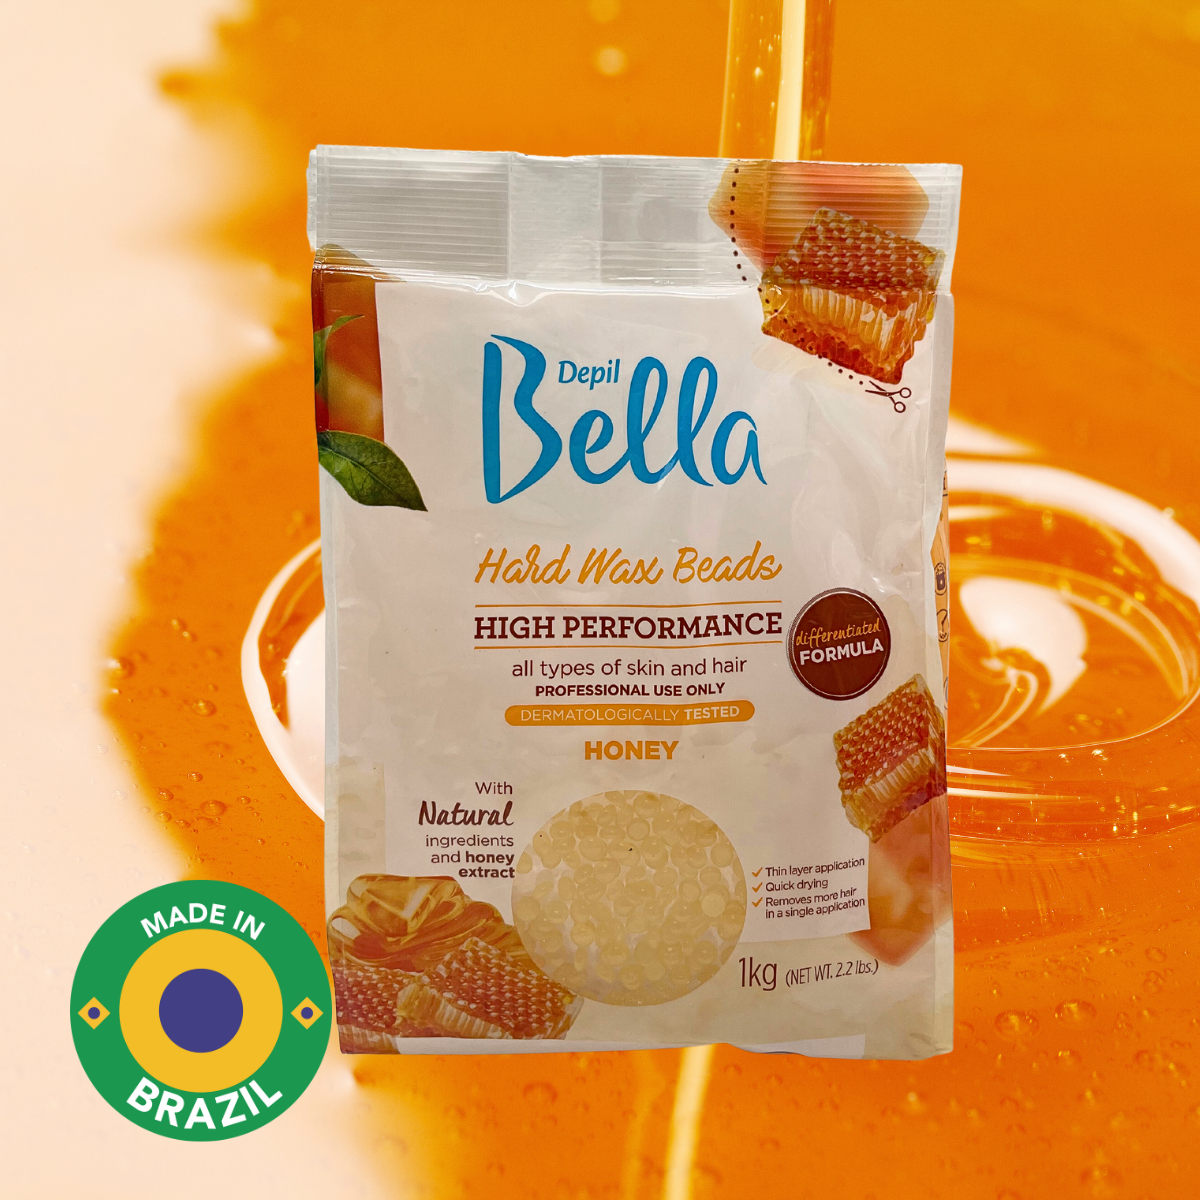 Depil Bella Hard Wax Beads Honey - Professional Hair Removal | 2.2 lbs - Buy professional cosmetics dedicated to hair removal